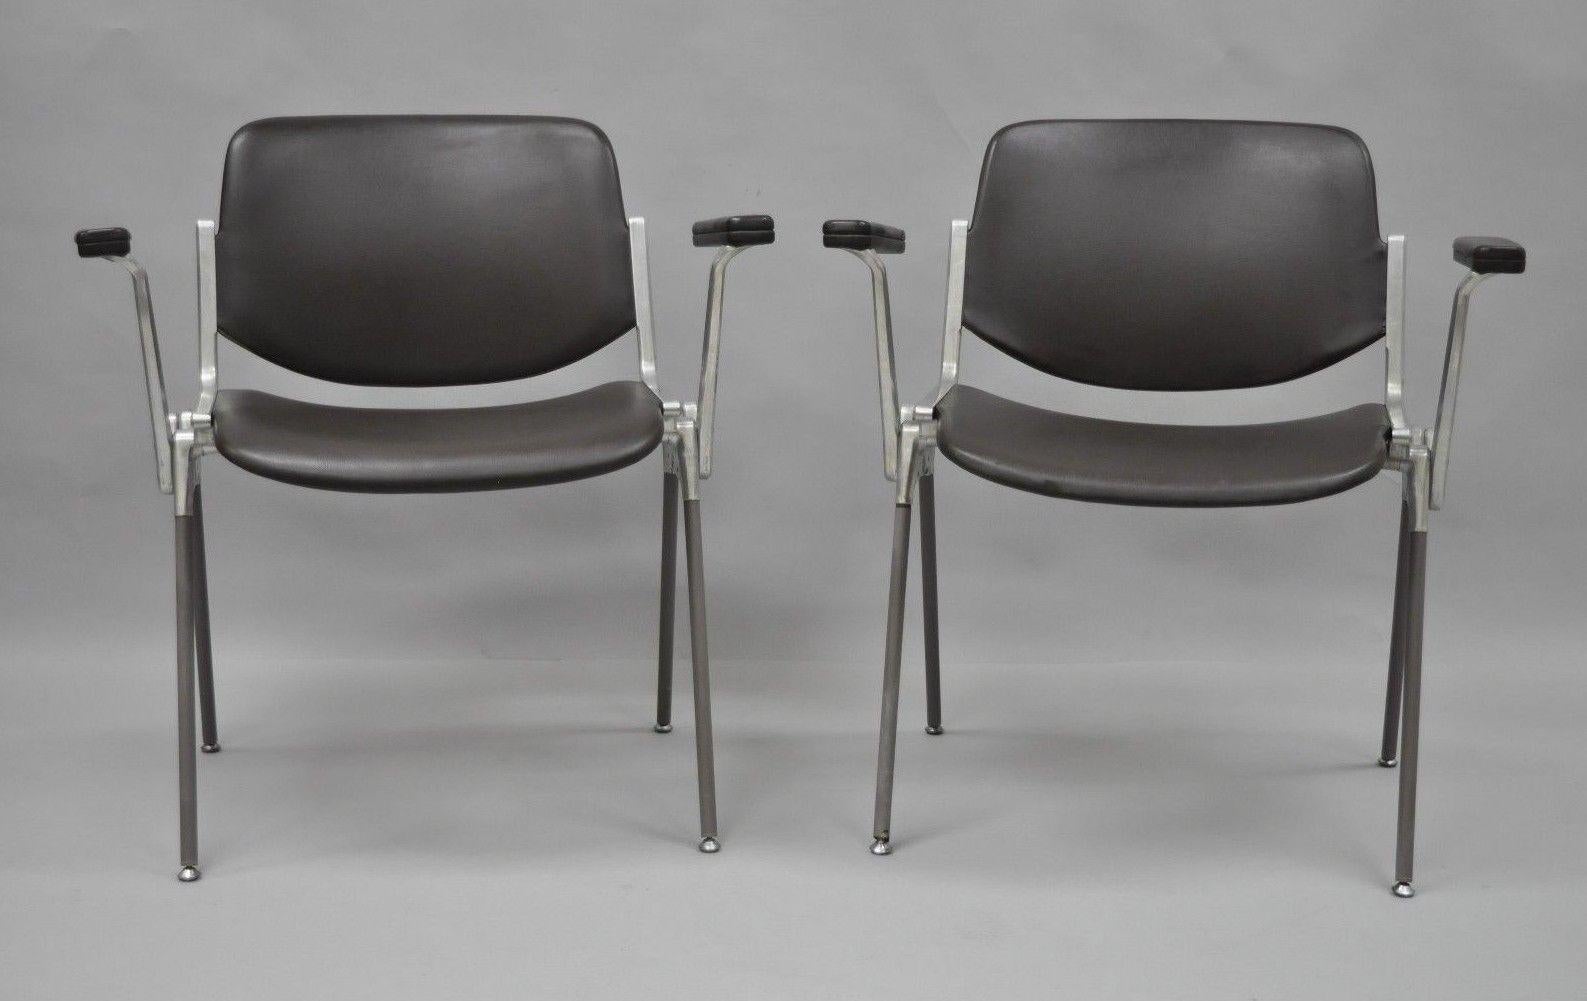 Pair of vintage Giancarlo Piretti for Castelli armchairs, Italian. Item features aluminium and steel frames, brown molded vinyl upholstery, sleek Modernist lines, original tag, made in Italy, circa 1960s, Italy. Measurements: 30